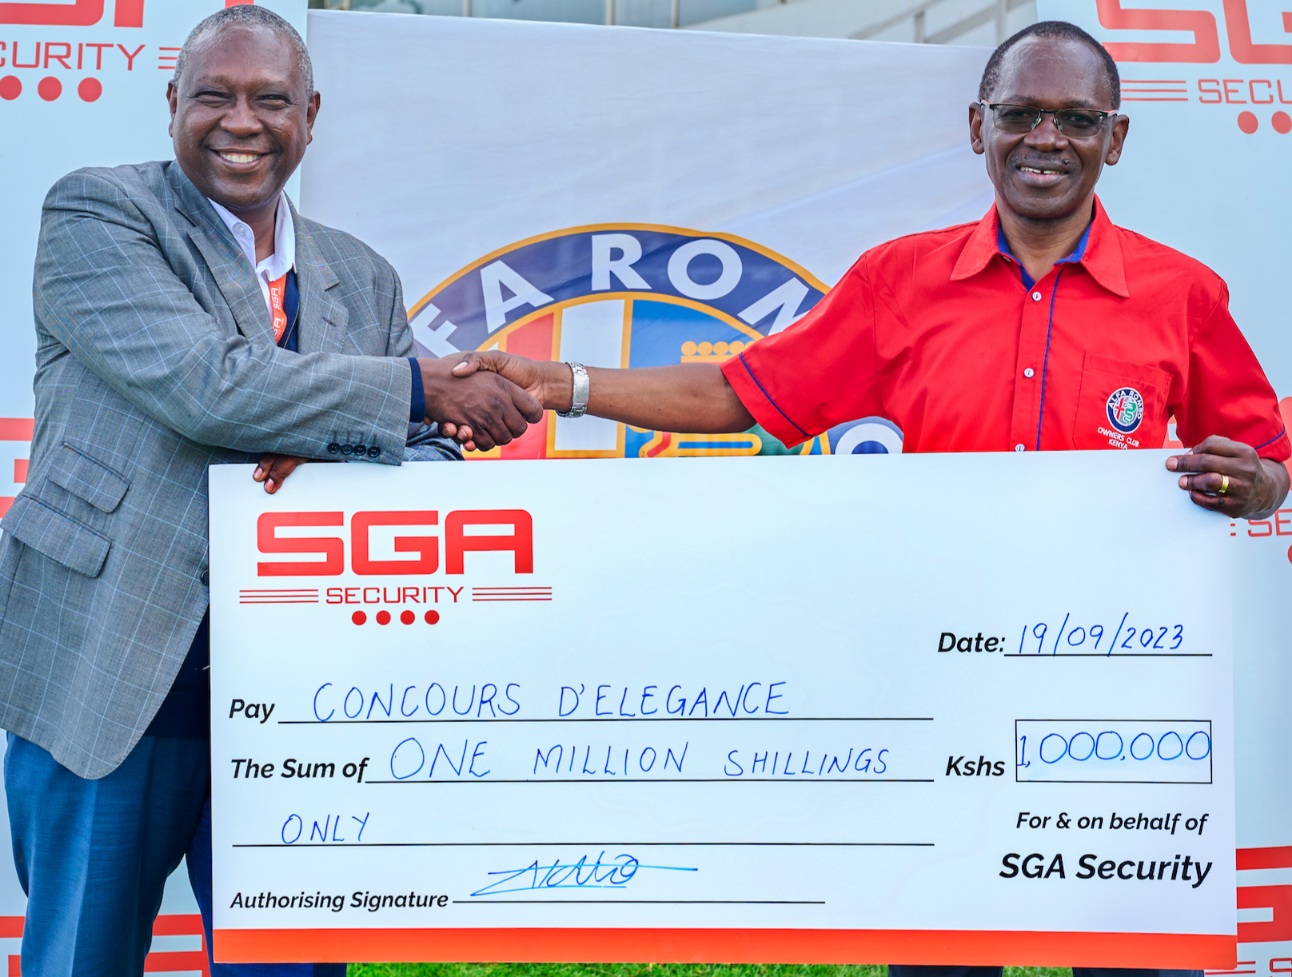 SGA Security Kenya Country Manager, Lucas Ndolo hands over a KES 1 Million cheque to Alfa Romeo Owners Club Chairman Peter Wanday as sponsorship for the 51st Concours d'Elegance that will be held on 24th September at the Nairobi Racecourse. SGA Kenya is this year's official security partner where they will provide guarding services, sniffer dogs, walk throughs search and crowd control management. PHOTO/COURTESY